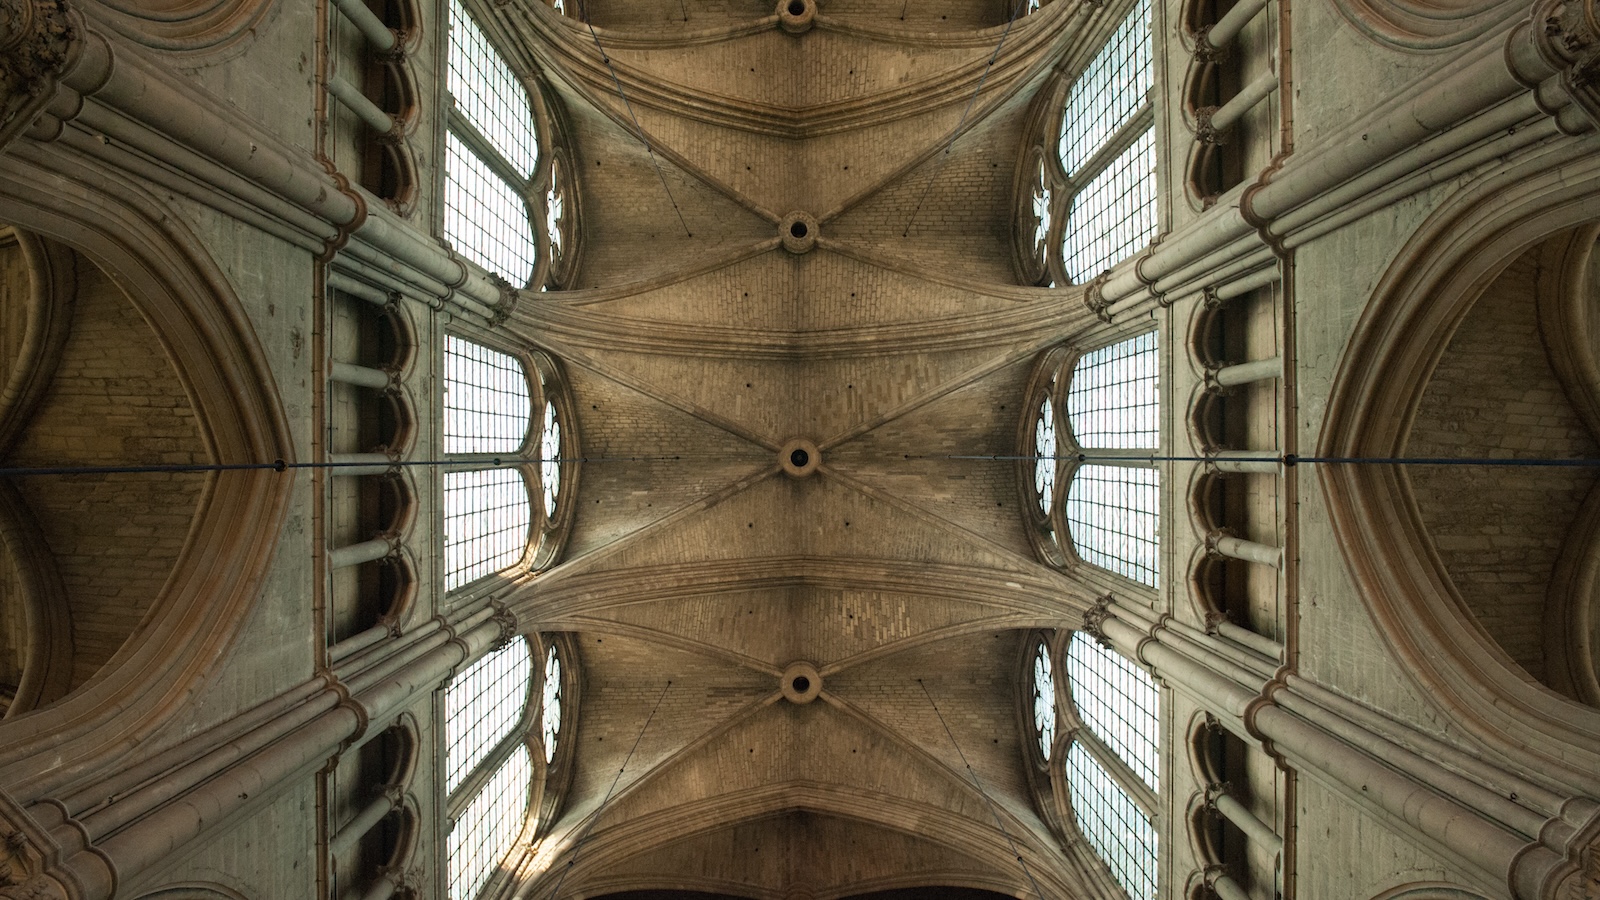 An image of a church's ornate ceiling shot directly from below looking straight up